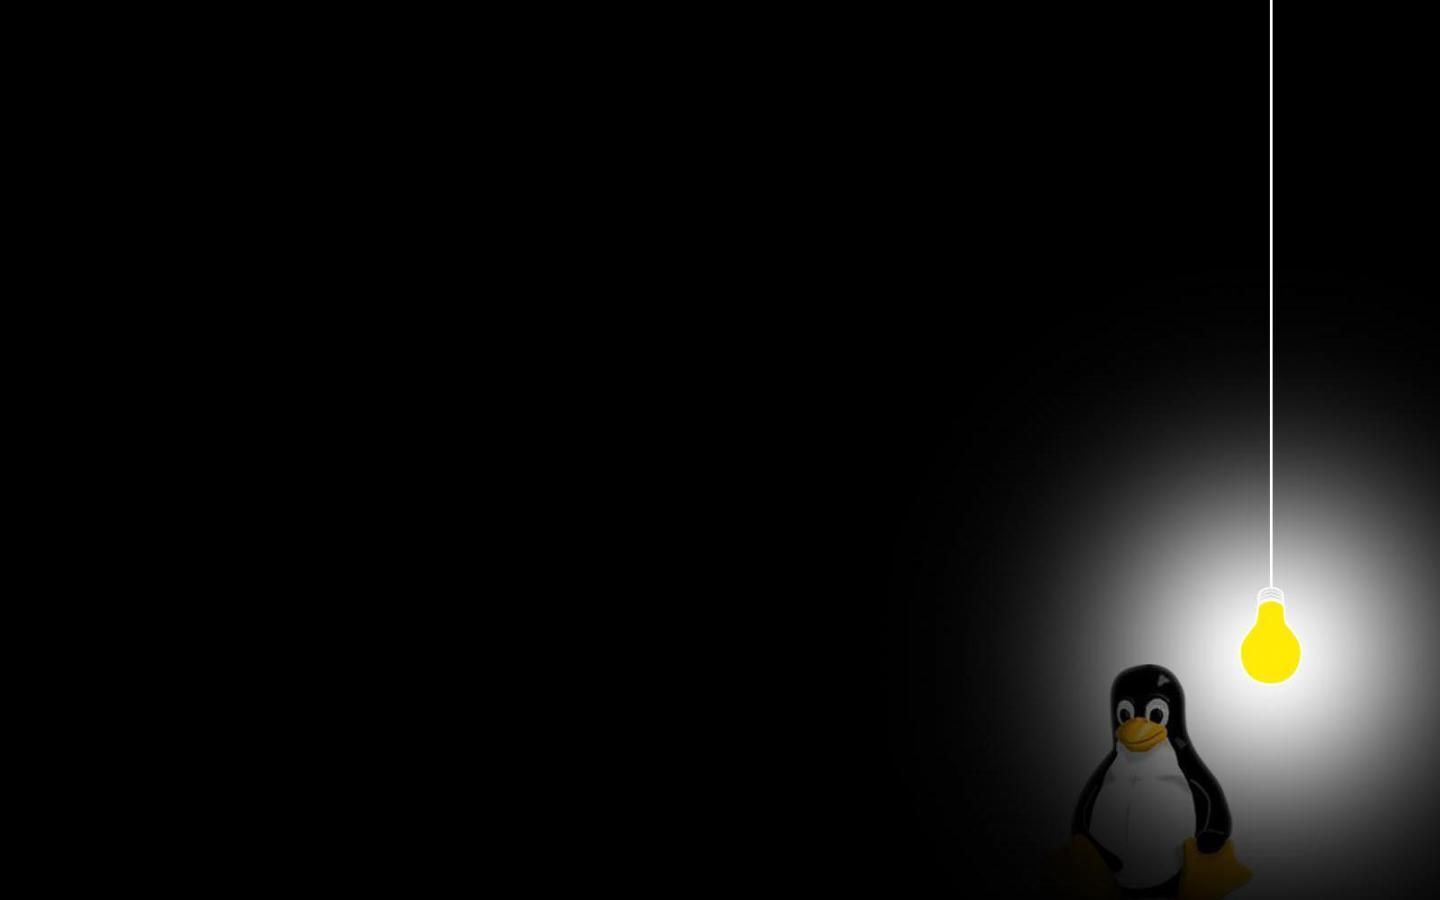 Free Linux Wallpapers - Linux Stickers and T-Shirts